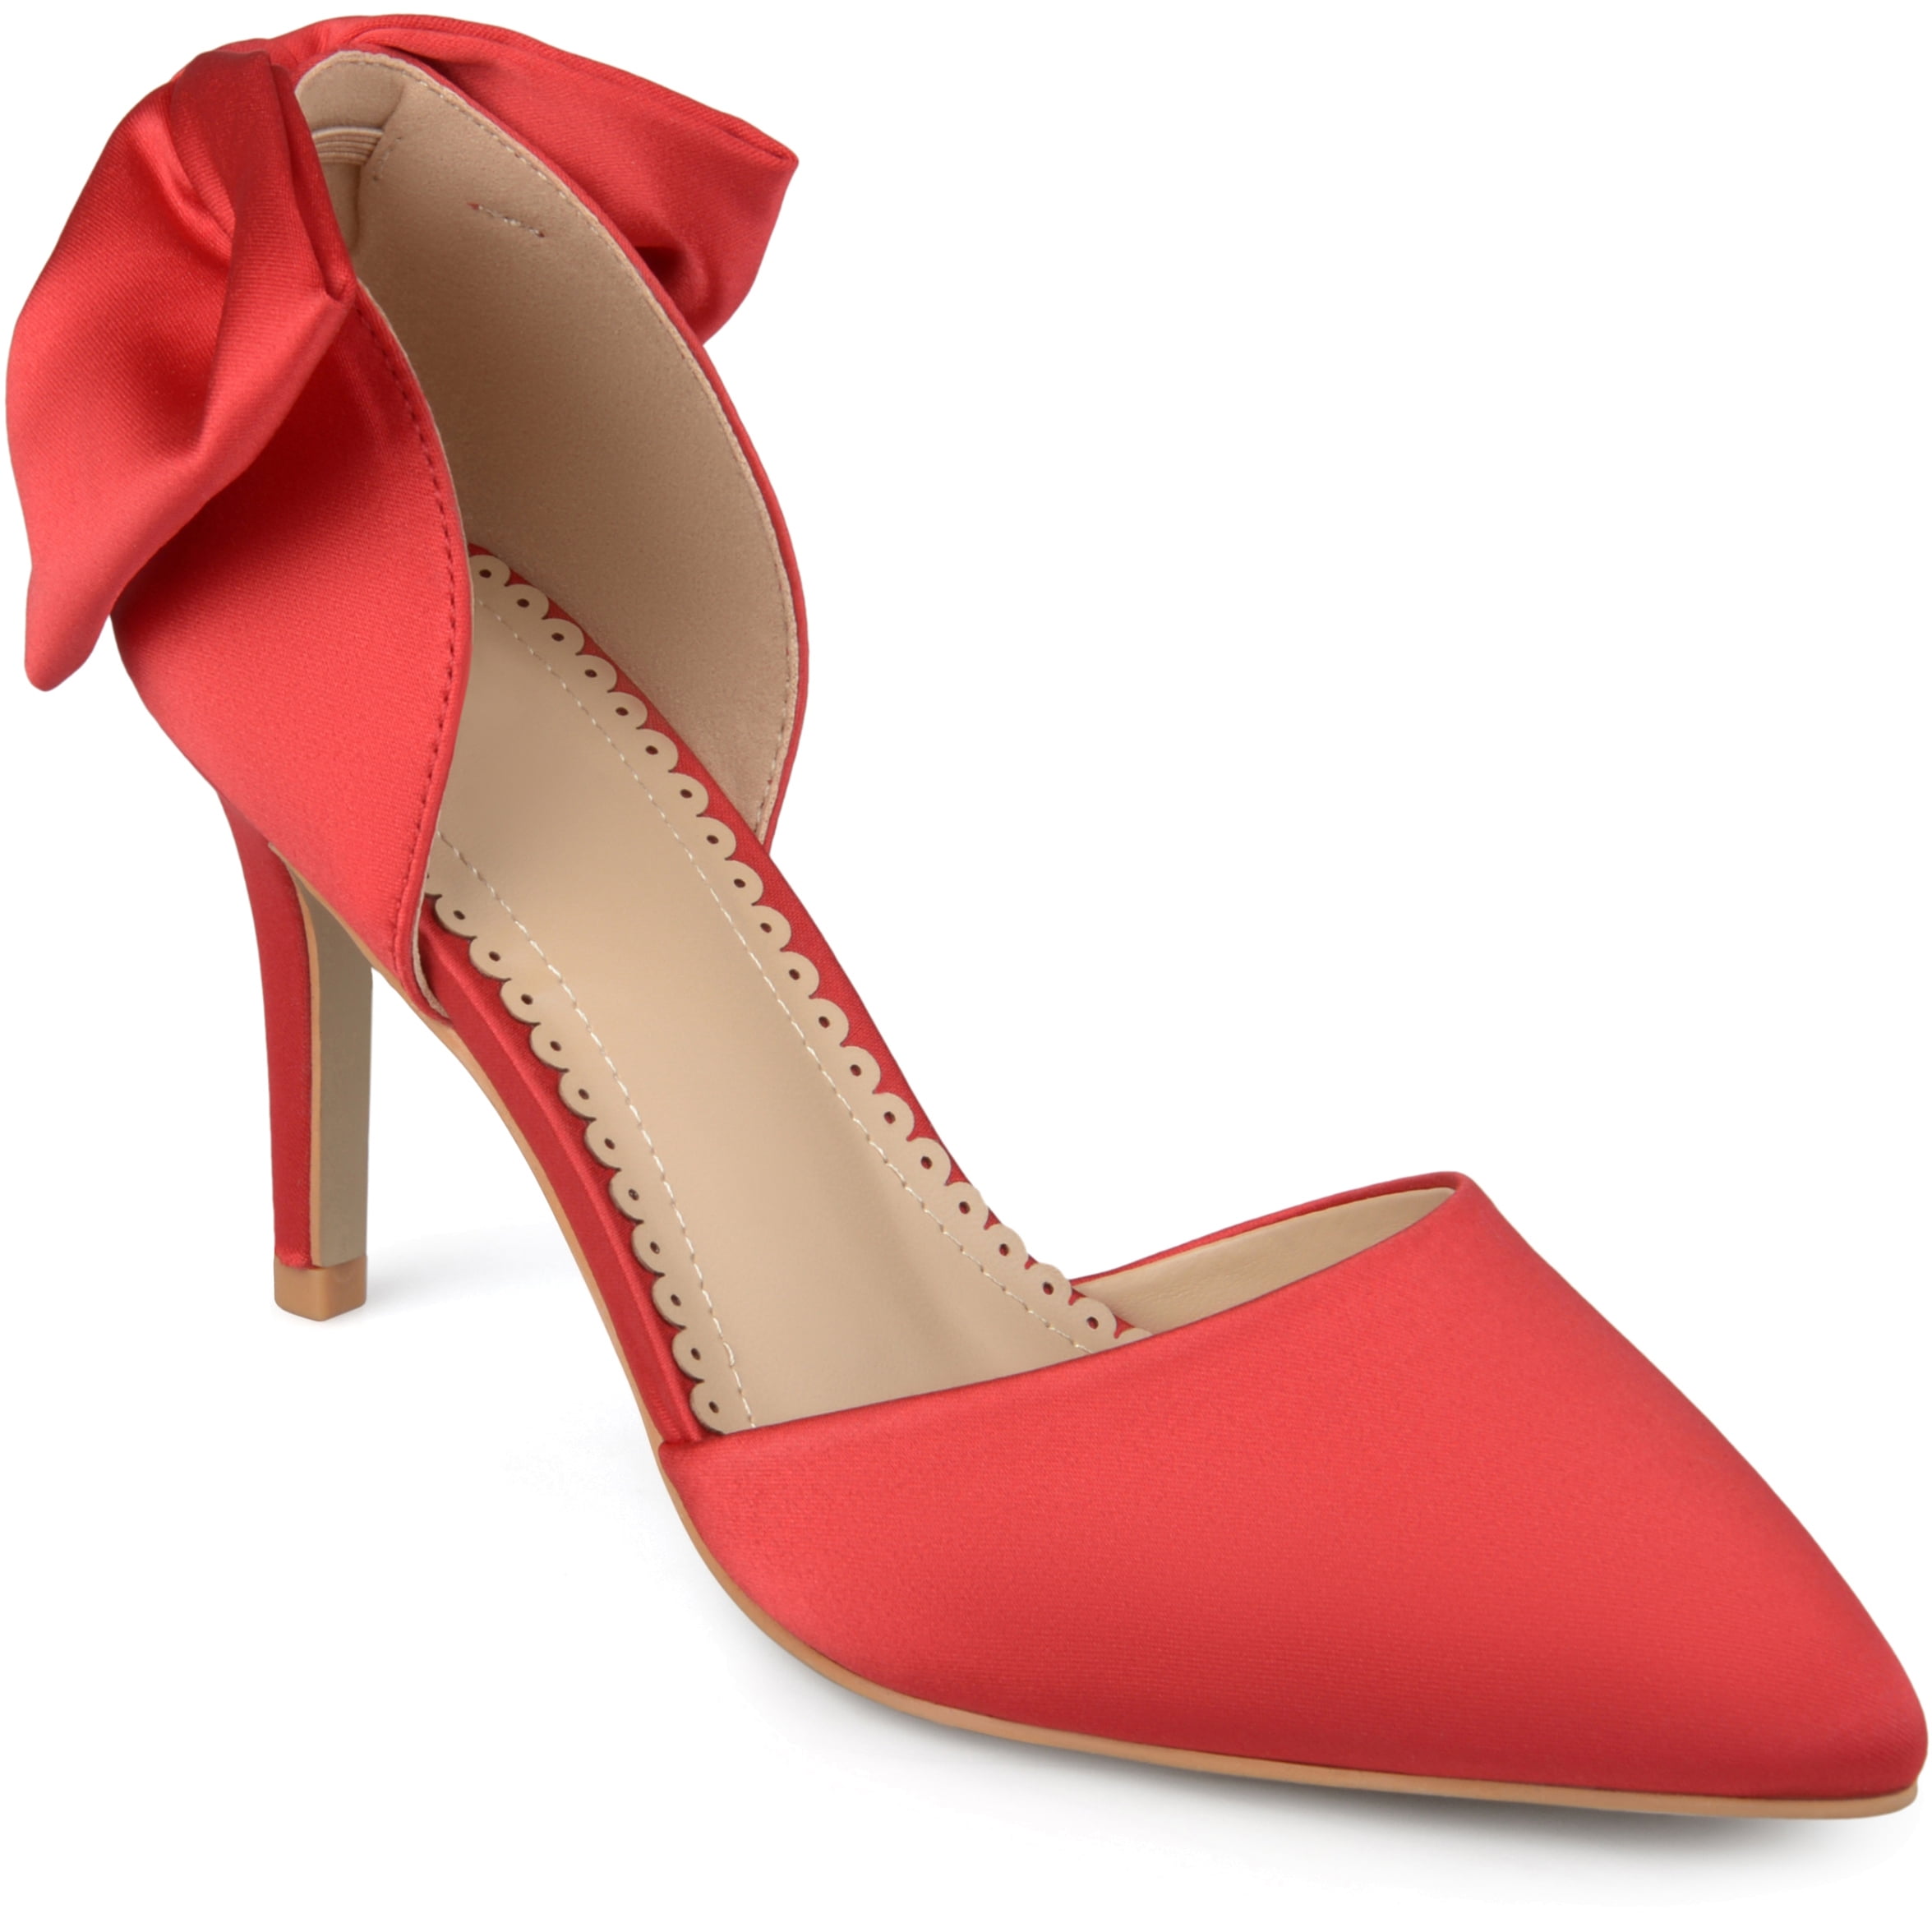 Women's Satin D'orsay Pointed Toe Bow Pumps - Walmart.com